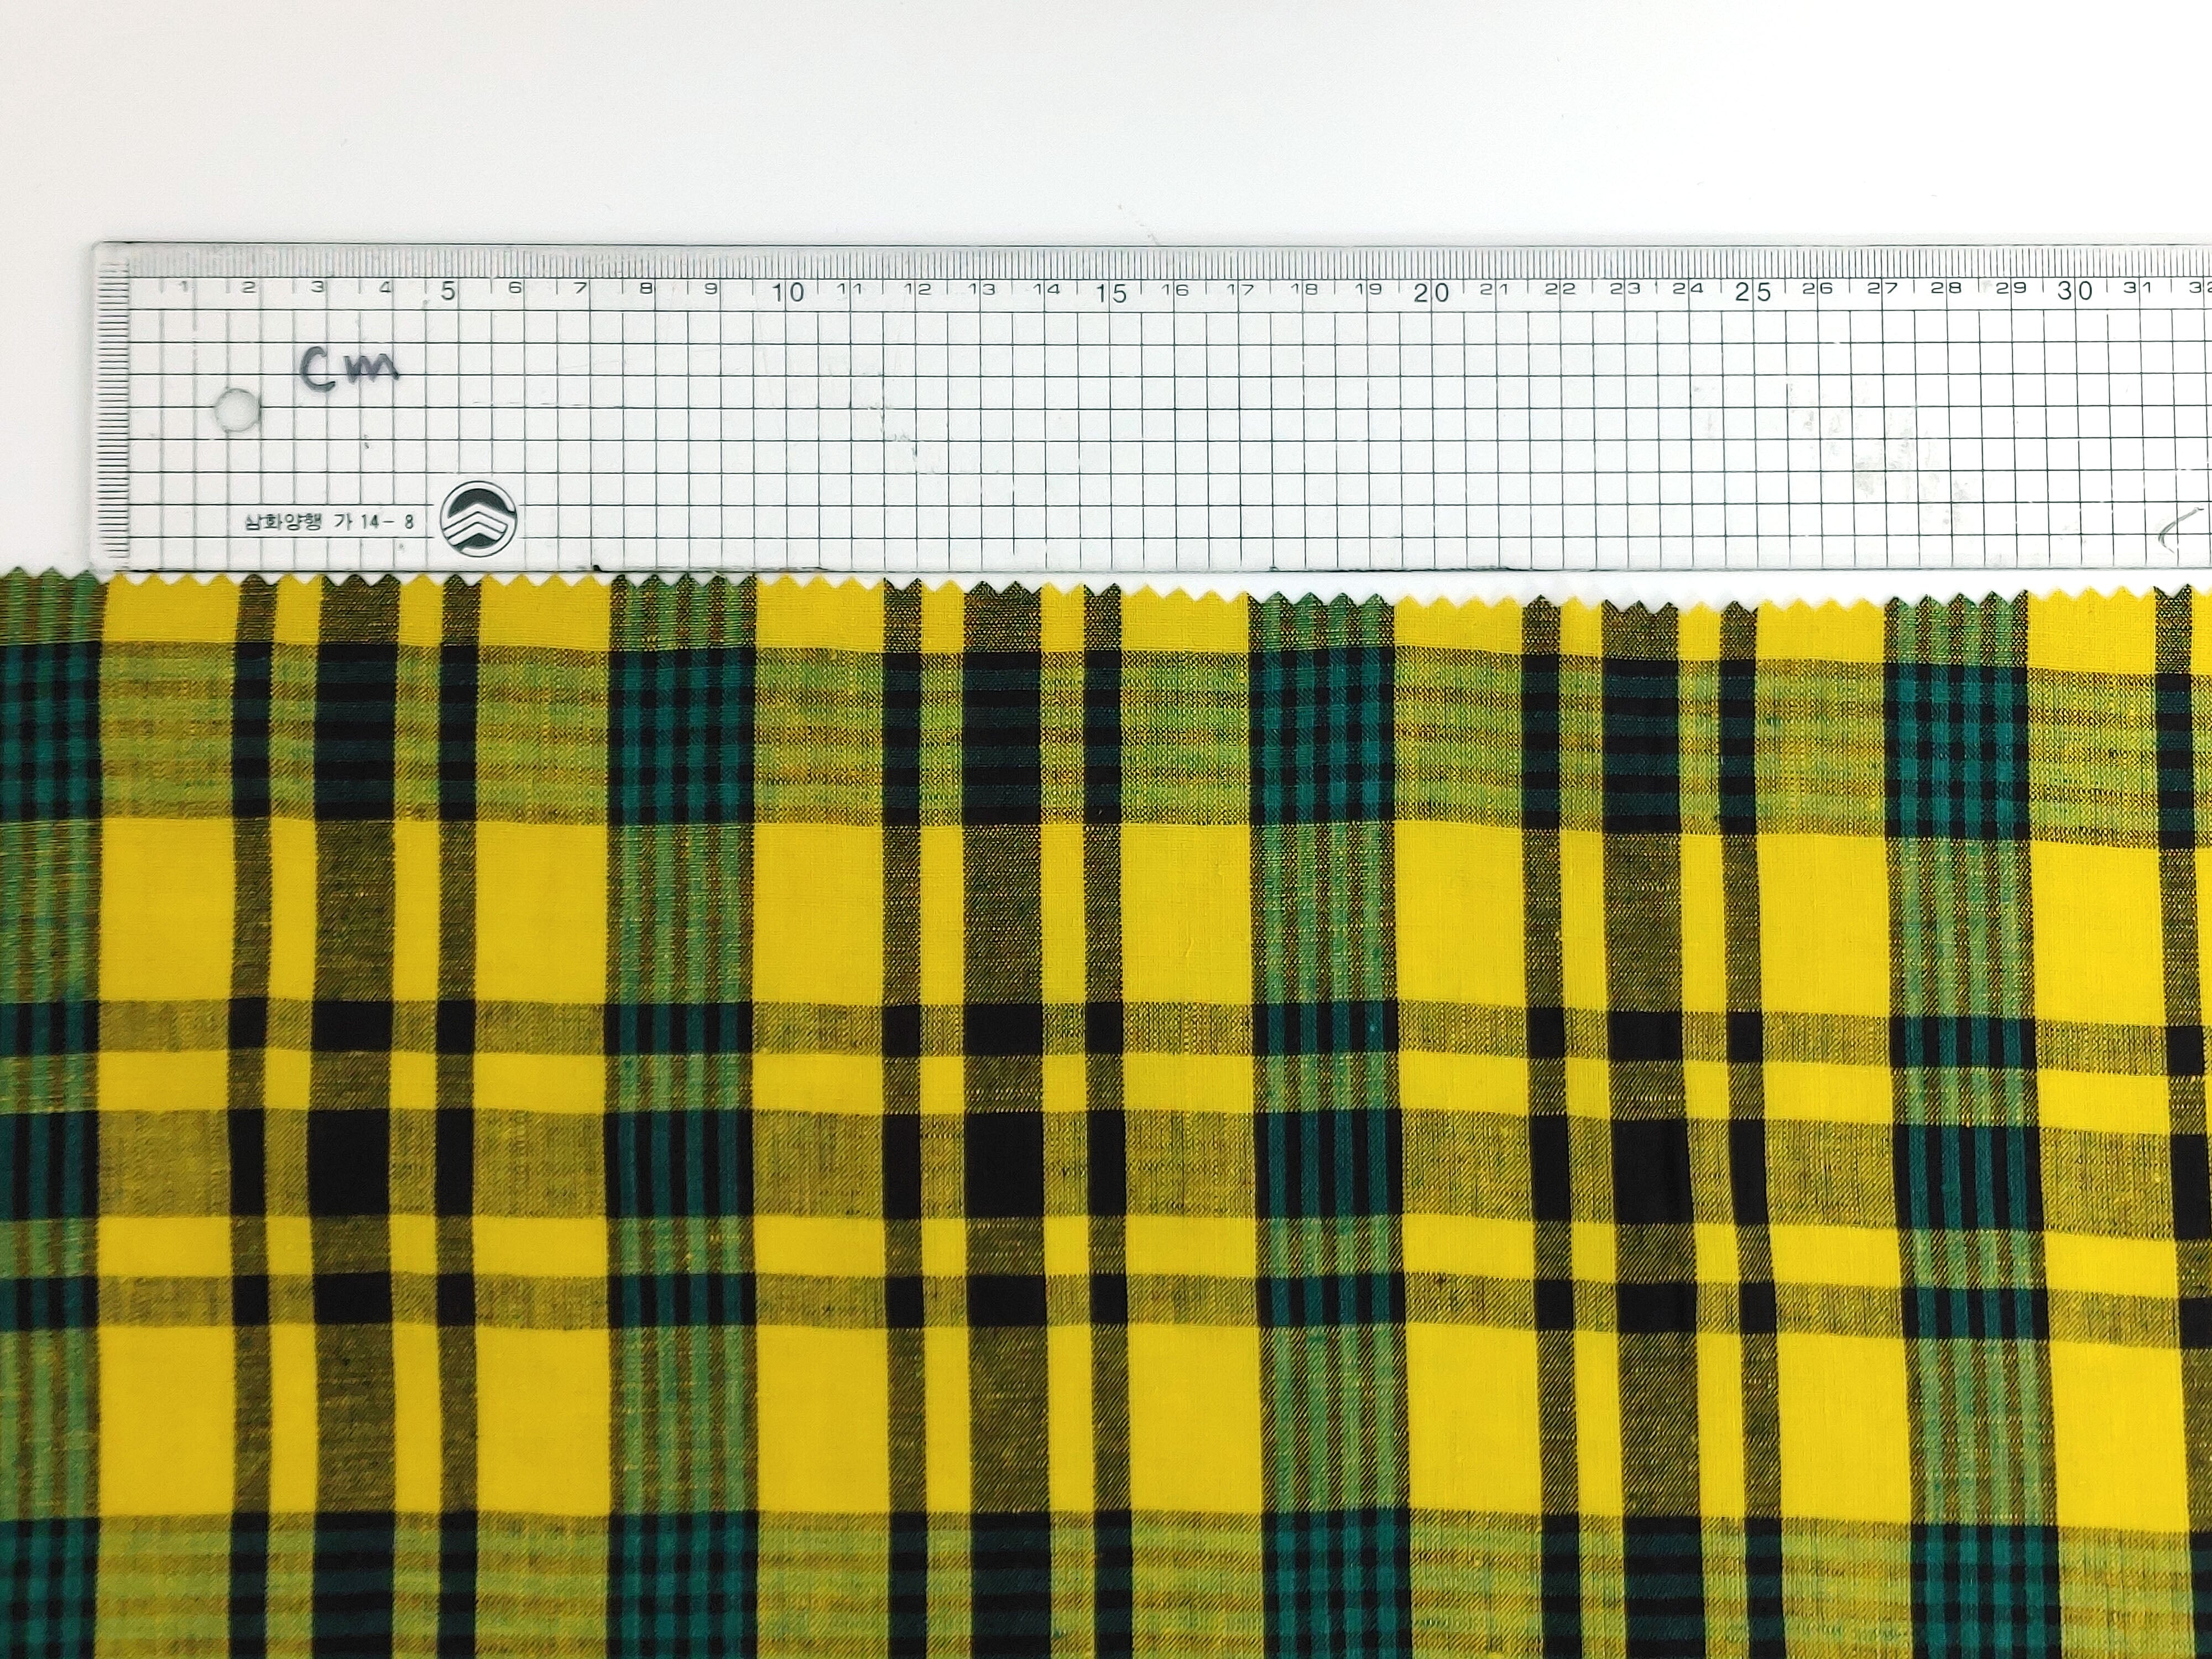 Sunny Fields: Yellow, Black and Green Linen Cotton Plaid Fabric 6619